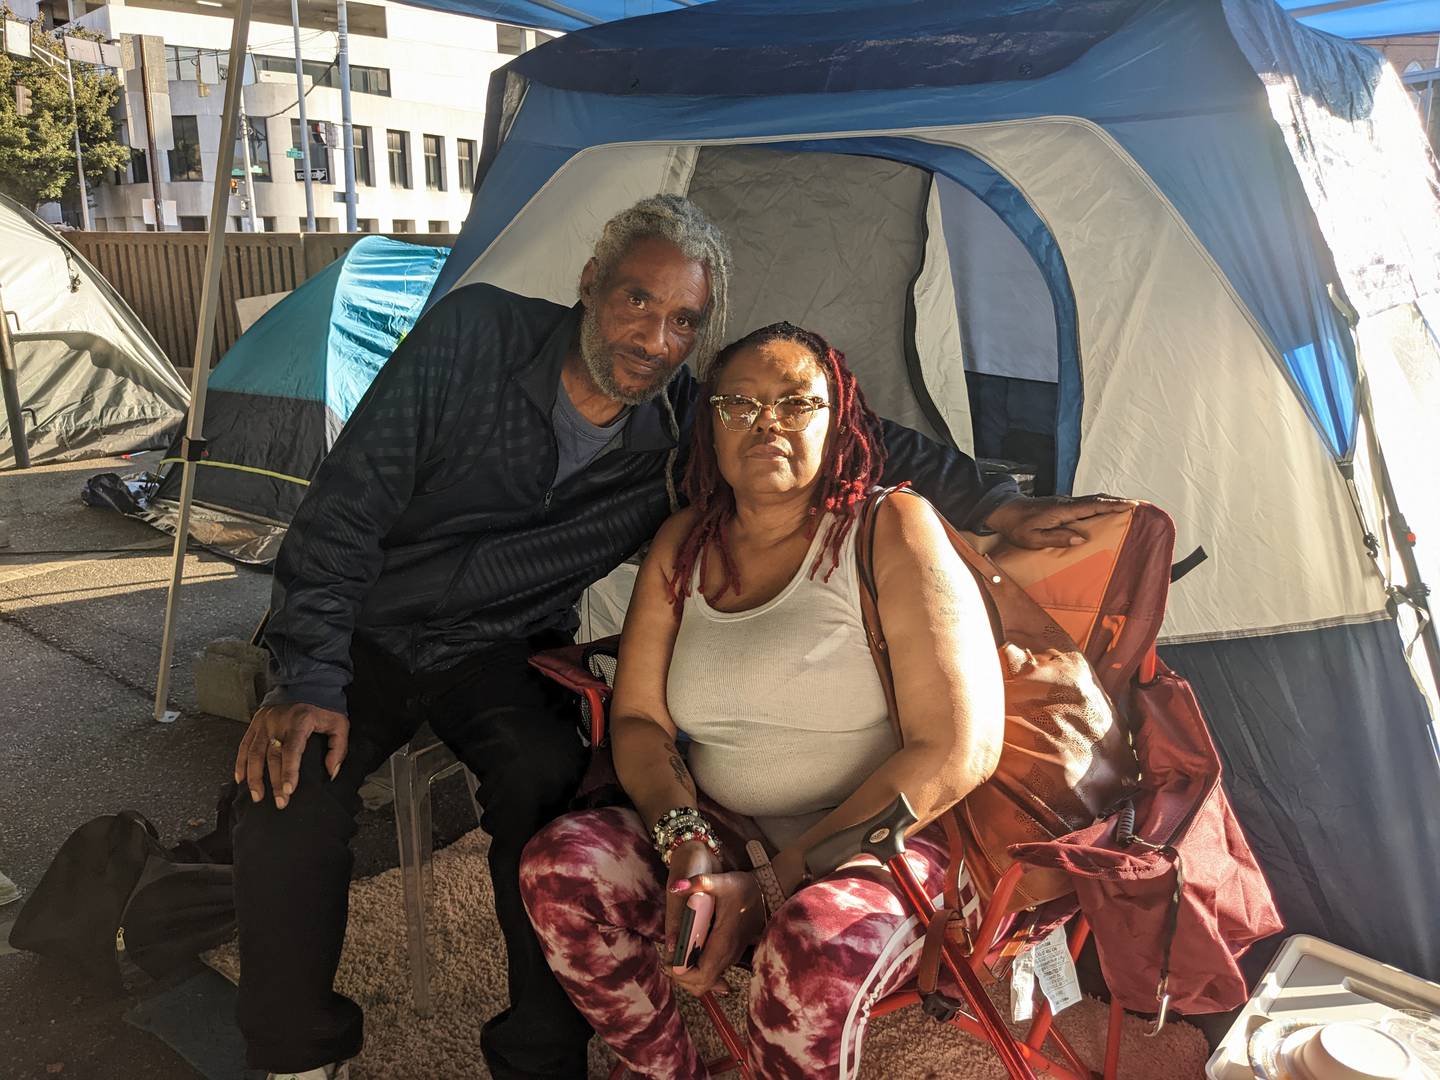 Michael and Rose Young pose for a picture in front of their tent on Friday, Oct. 7, 2022. They are residents of a homeless encampment under the Jones Fall Expressway.